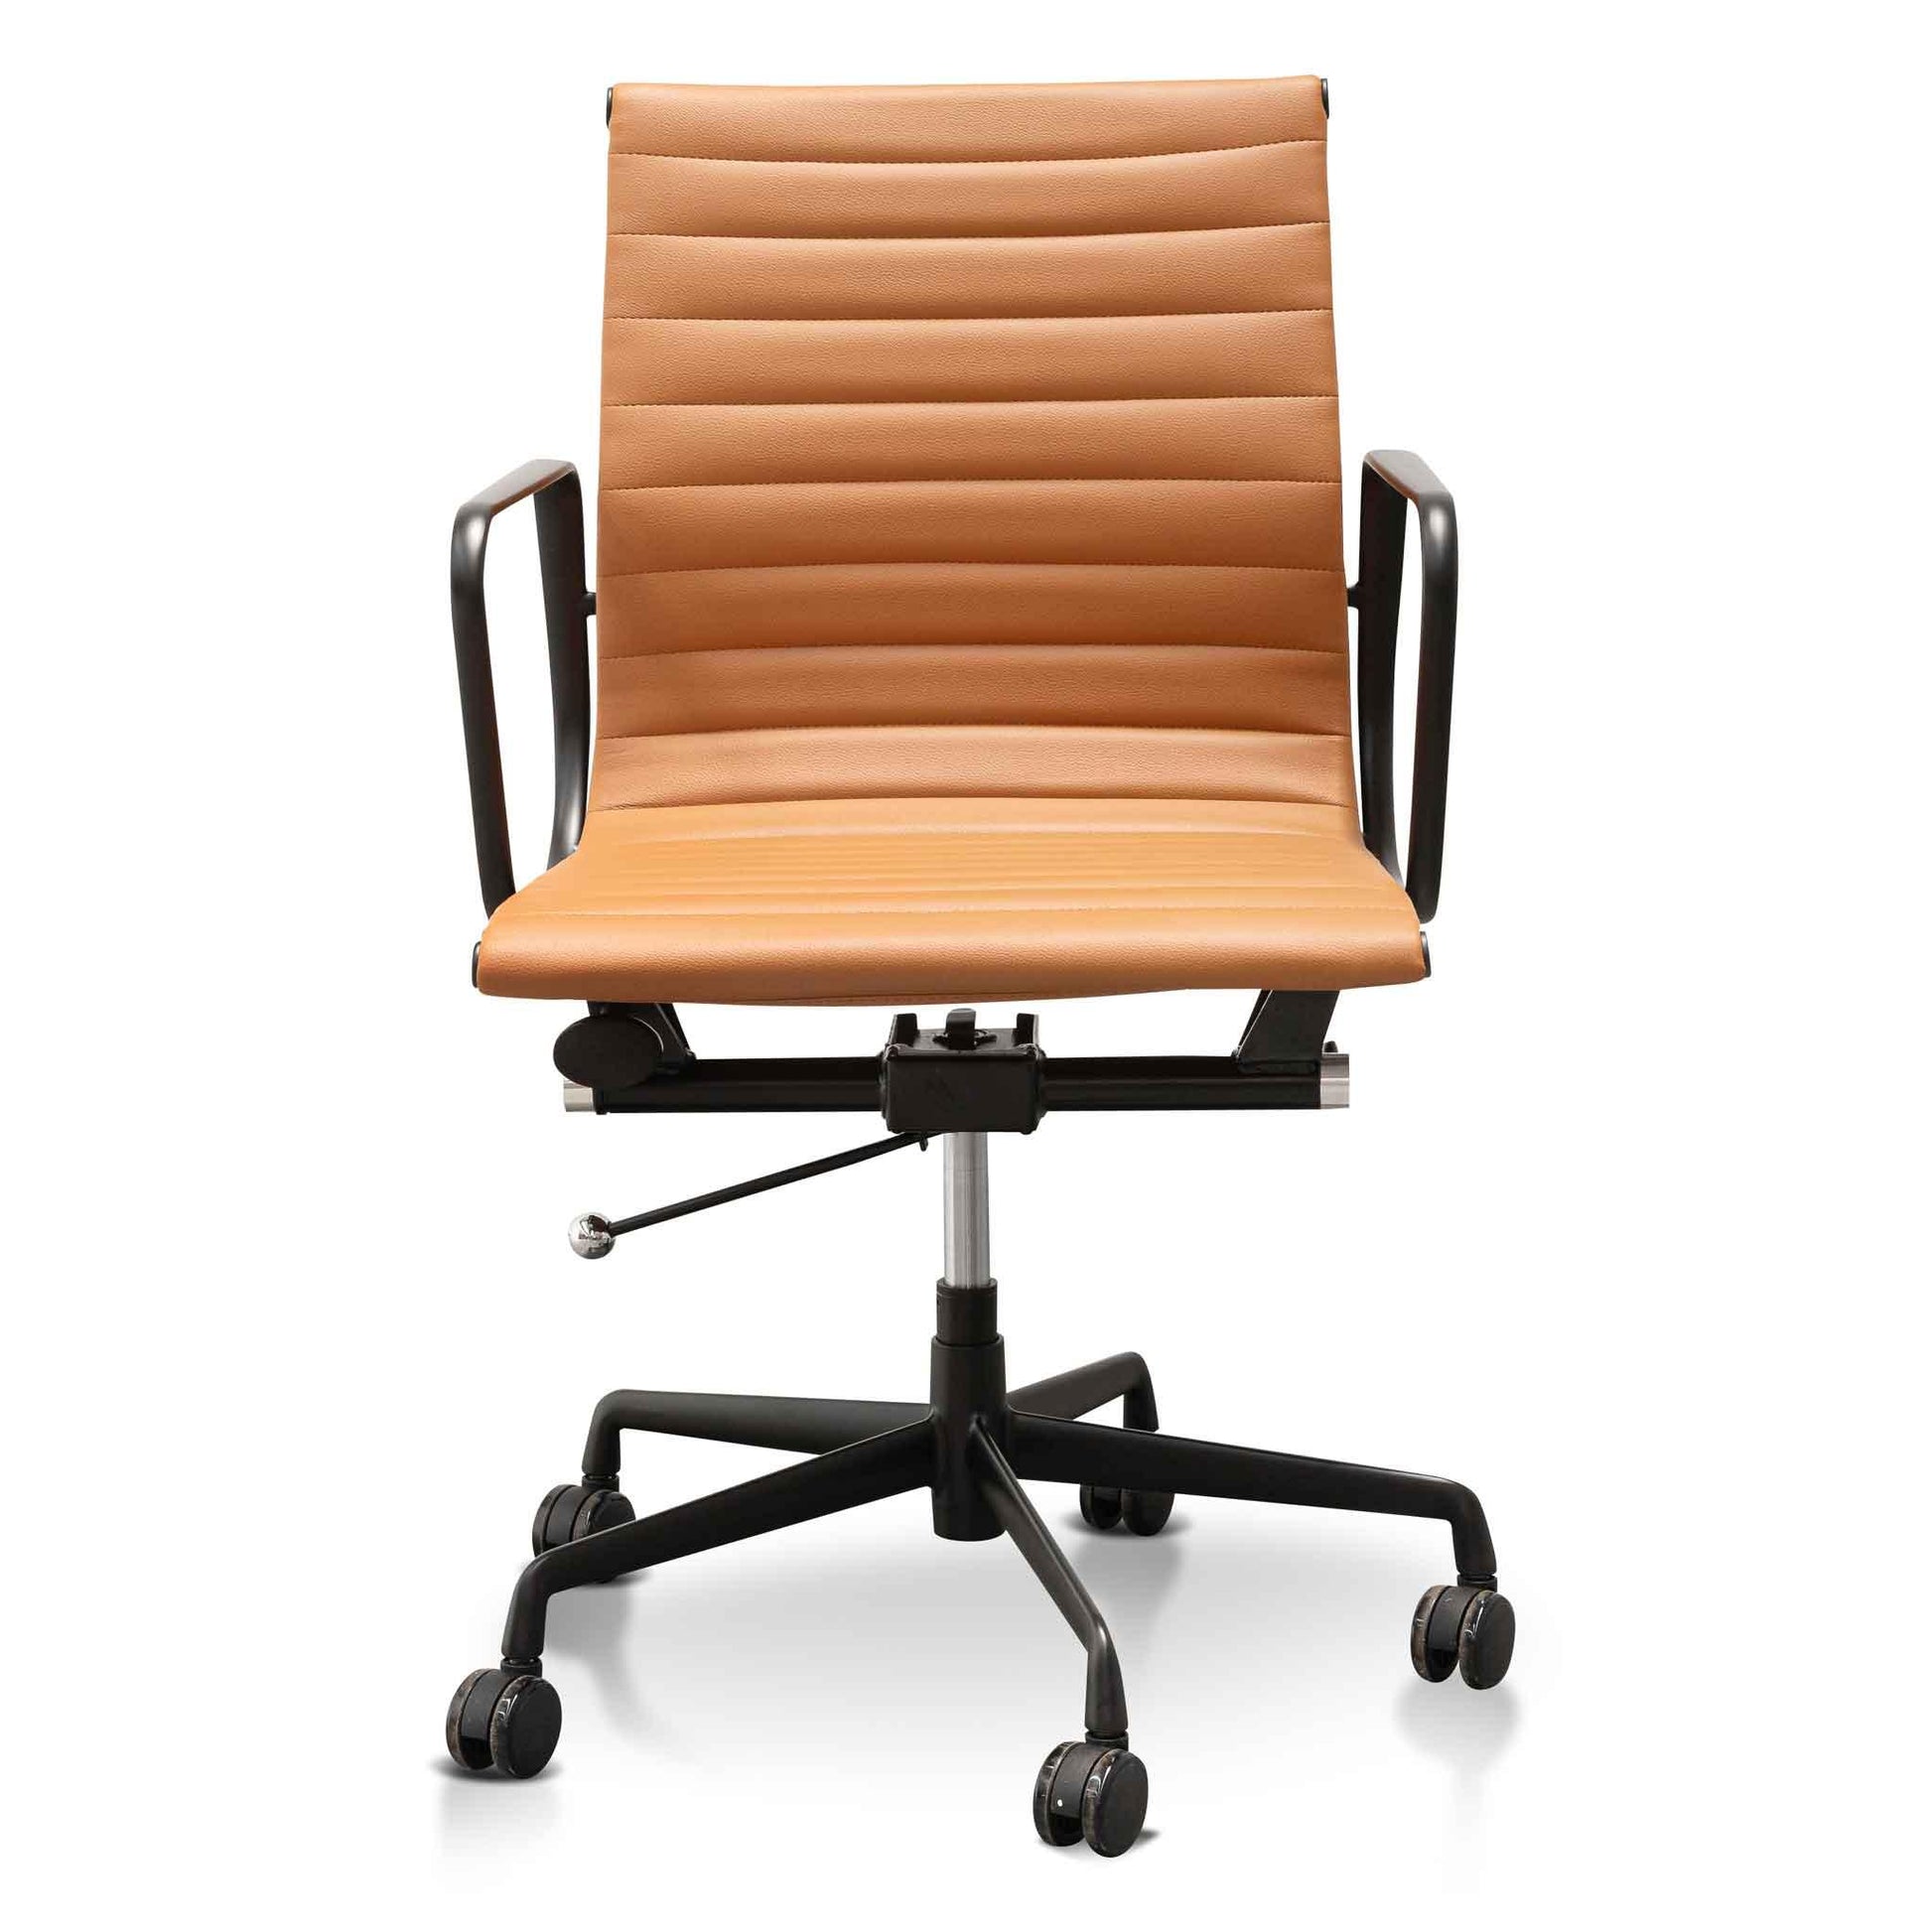 Calibre Low Back Office Chair - Saddle Tan in Black Frame OC6403-YS-Office/Gaming Chairs-Calibre-Prime Furniture